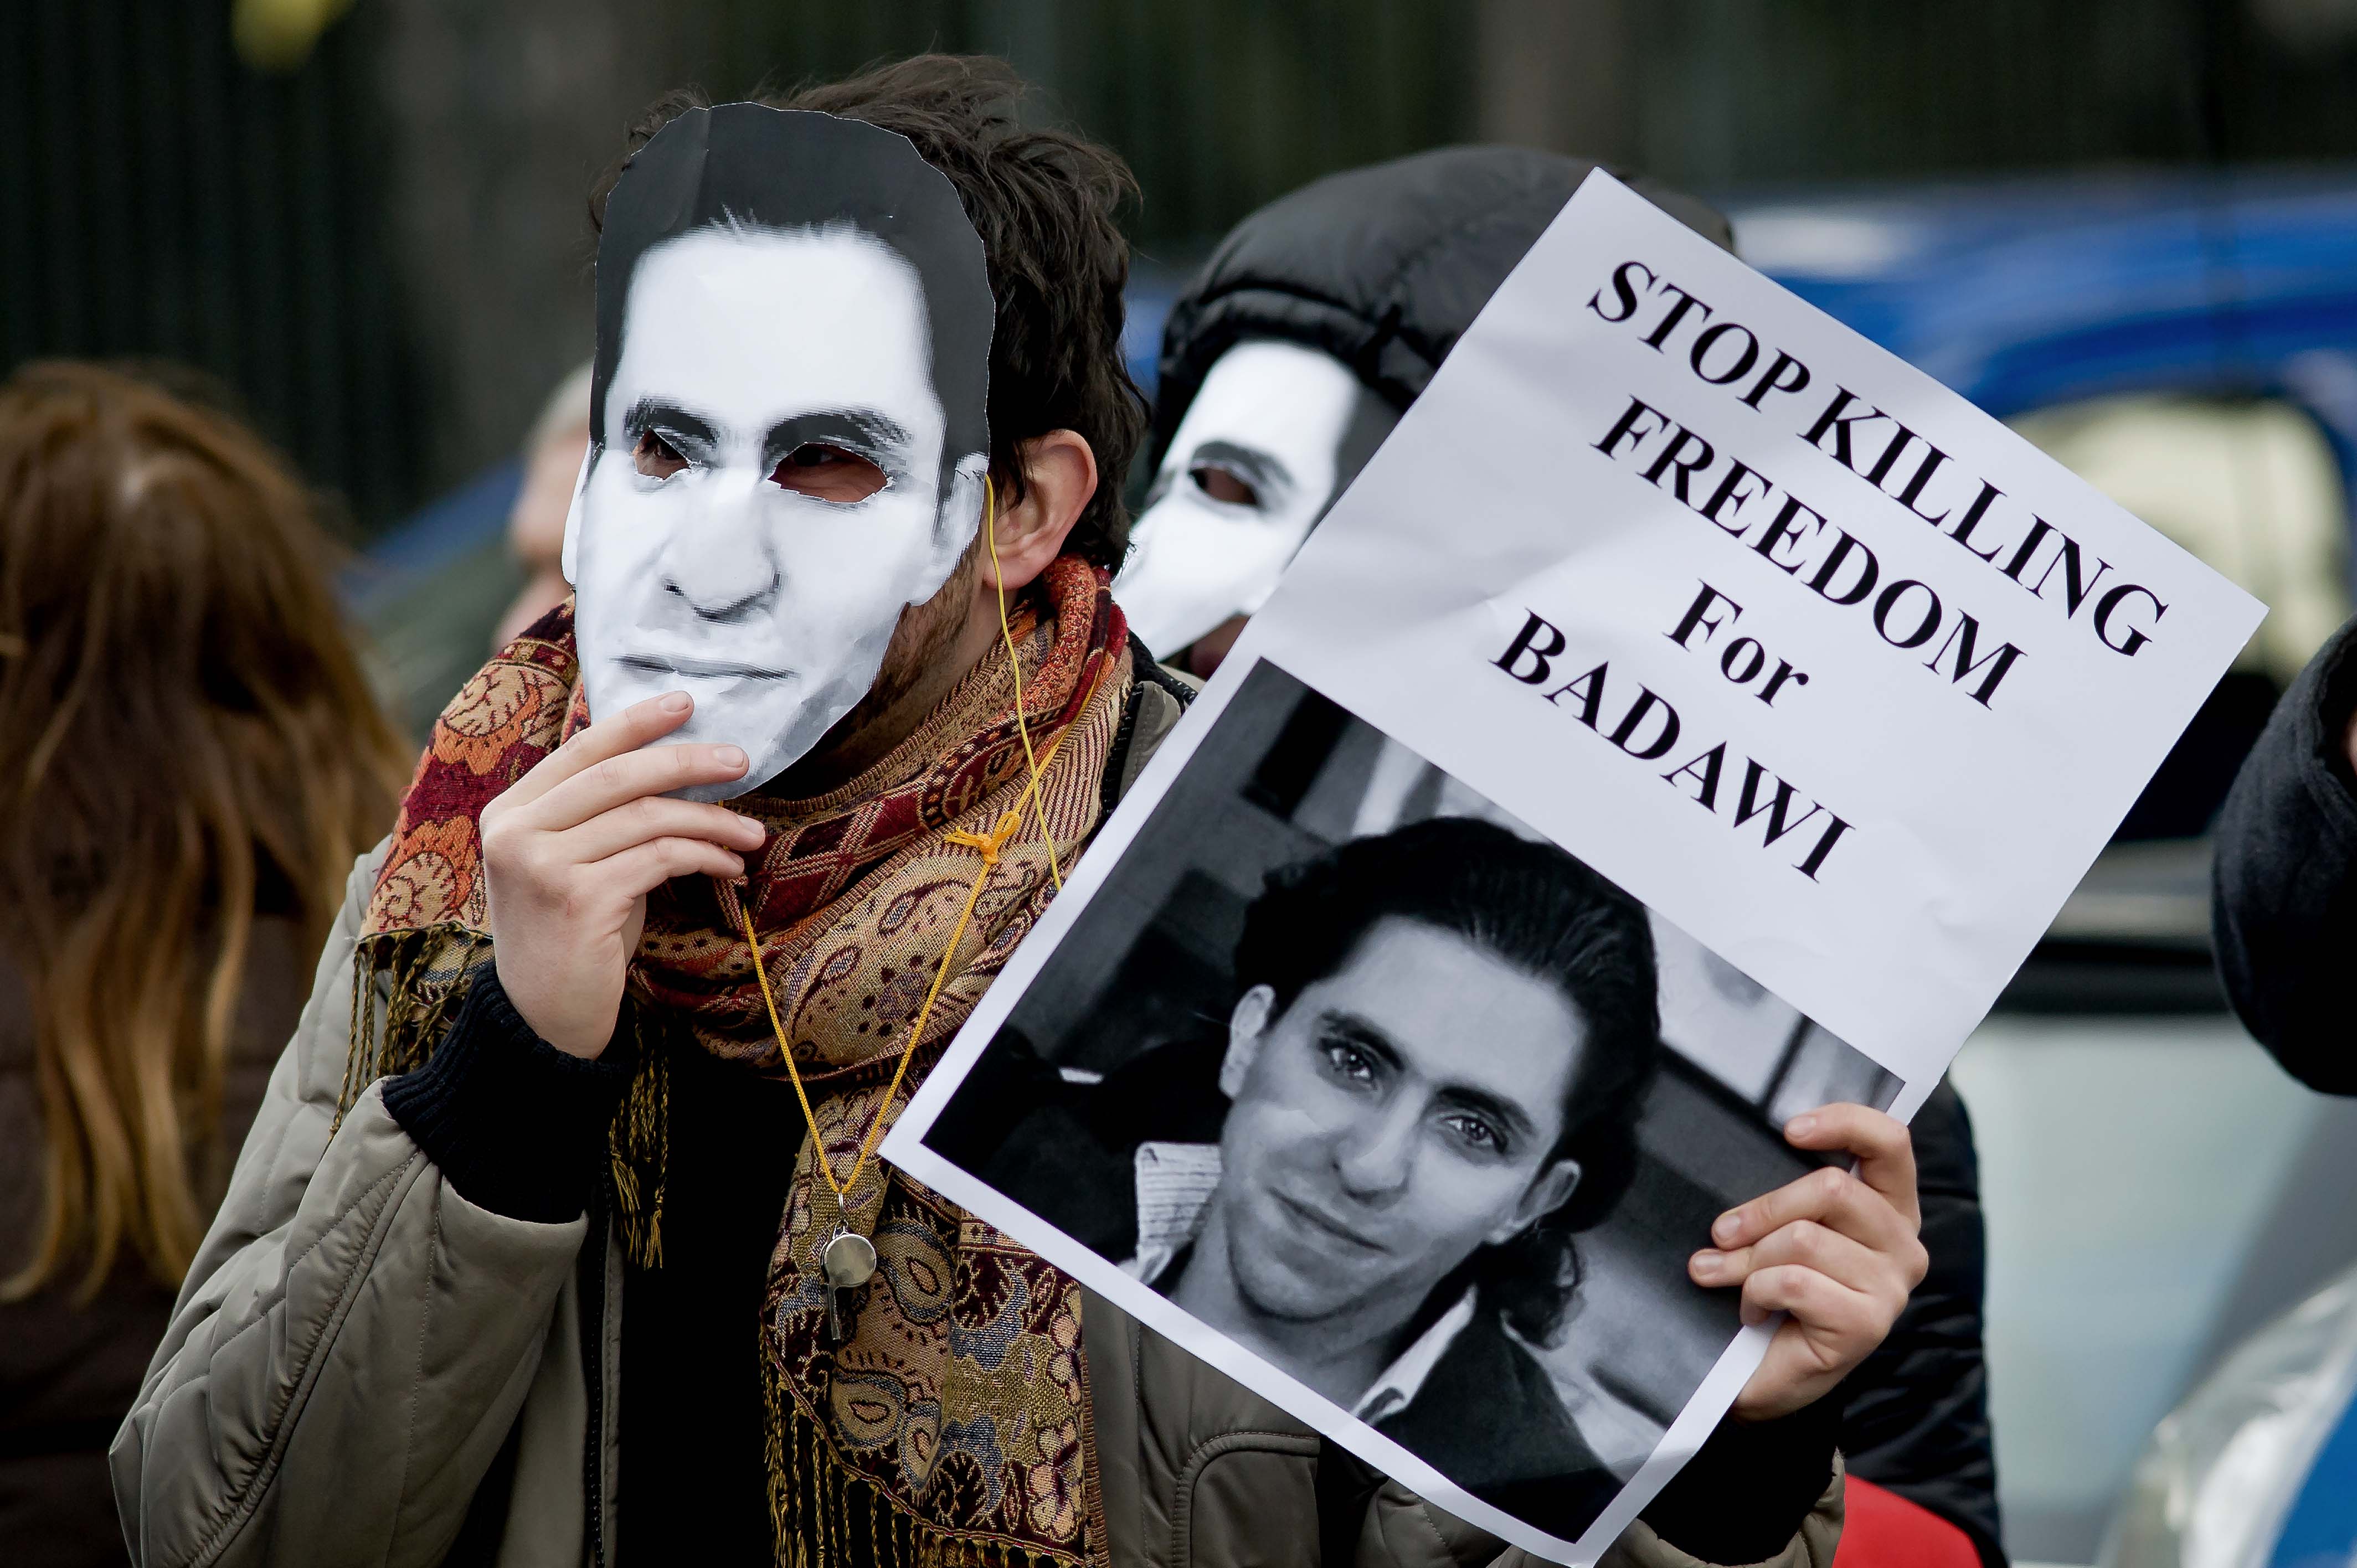 Rome, Italy. 9th January 2014 -- Protestors with masks of Raif Badaw, protesting against the request of the death penalty and calling for the release of blogger. -- Sit-in in front of the Embassy of Saudi Arabia to protest against the flogging and ask for the immediate release of journalist and blogger Saudi Raif Badawi imprisoned on charges of apostasy. Photograph by Stefano Montesi. Copyright: Demotix 